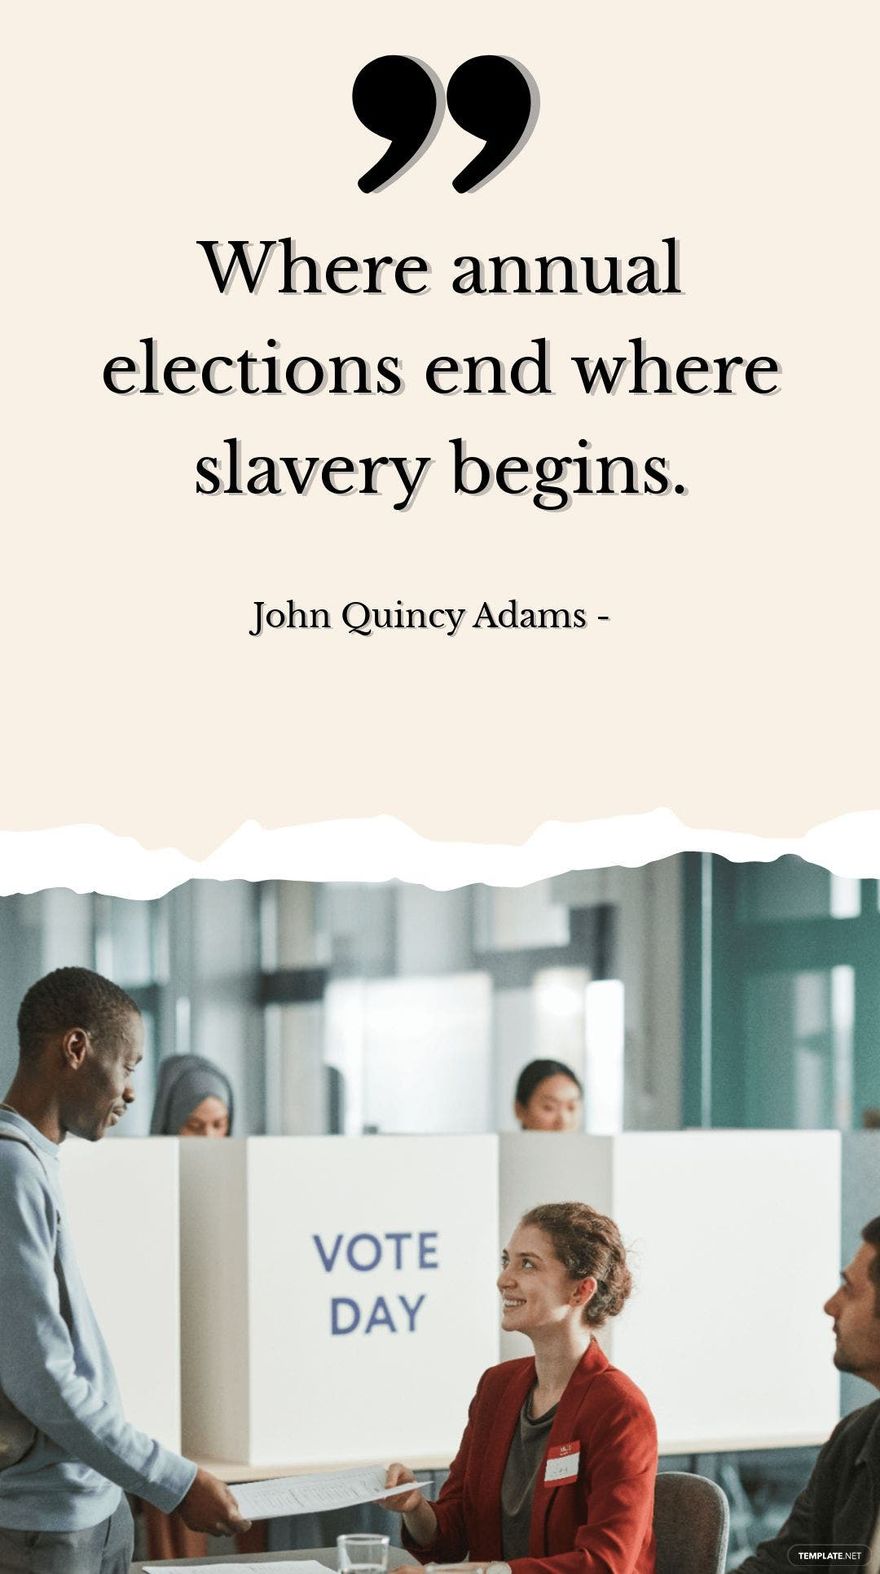 Free John Quincy Adams - Where annual elections end where slavery begins. in JPG